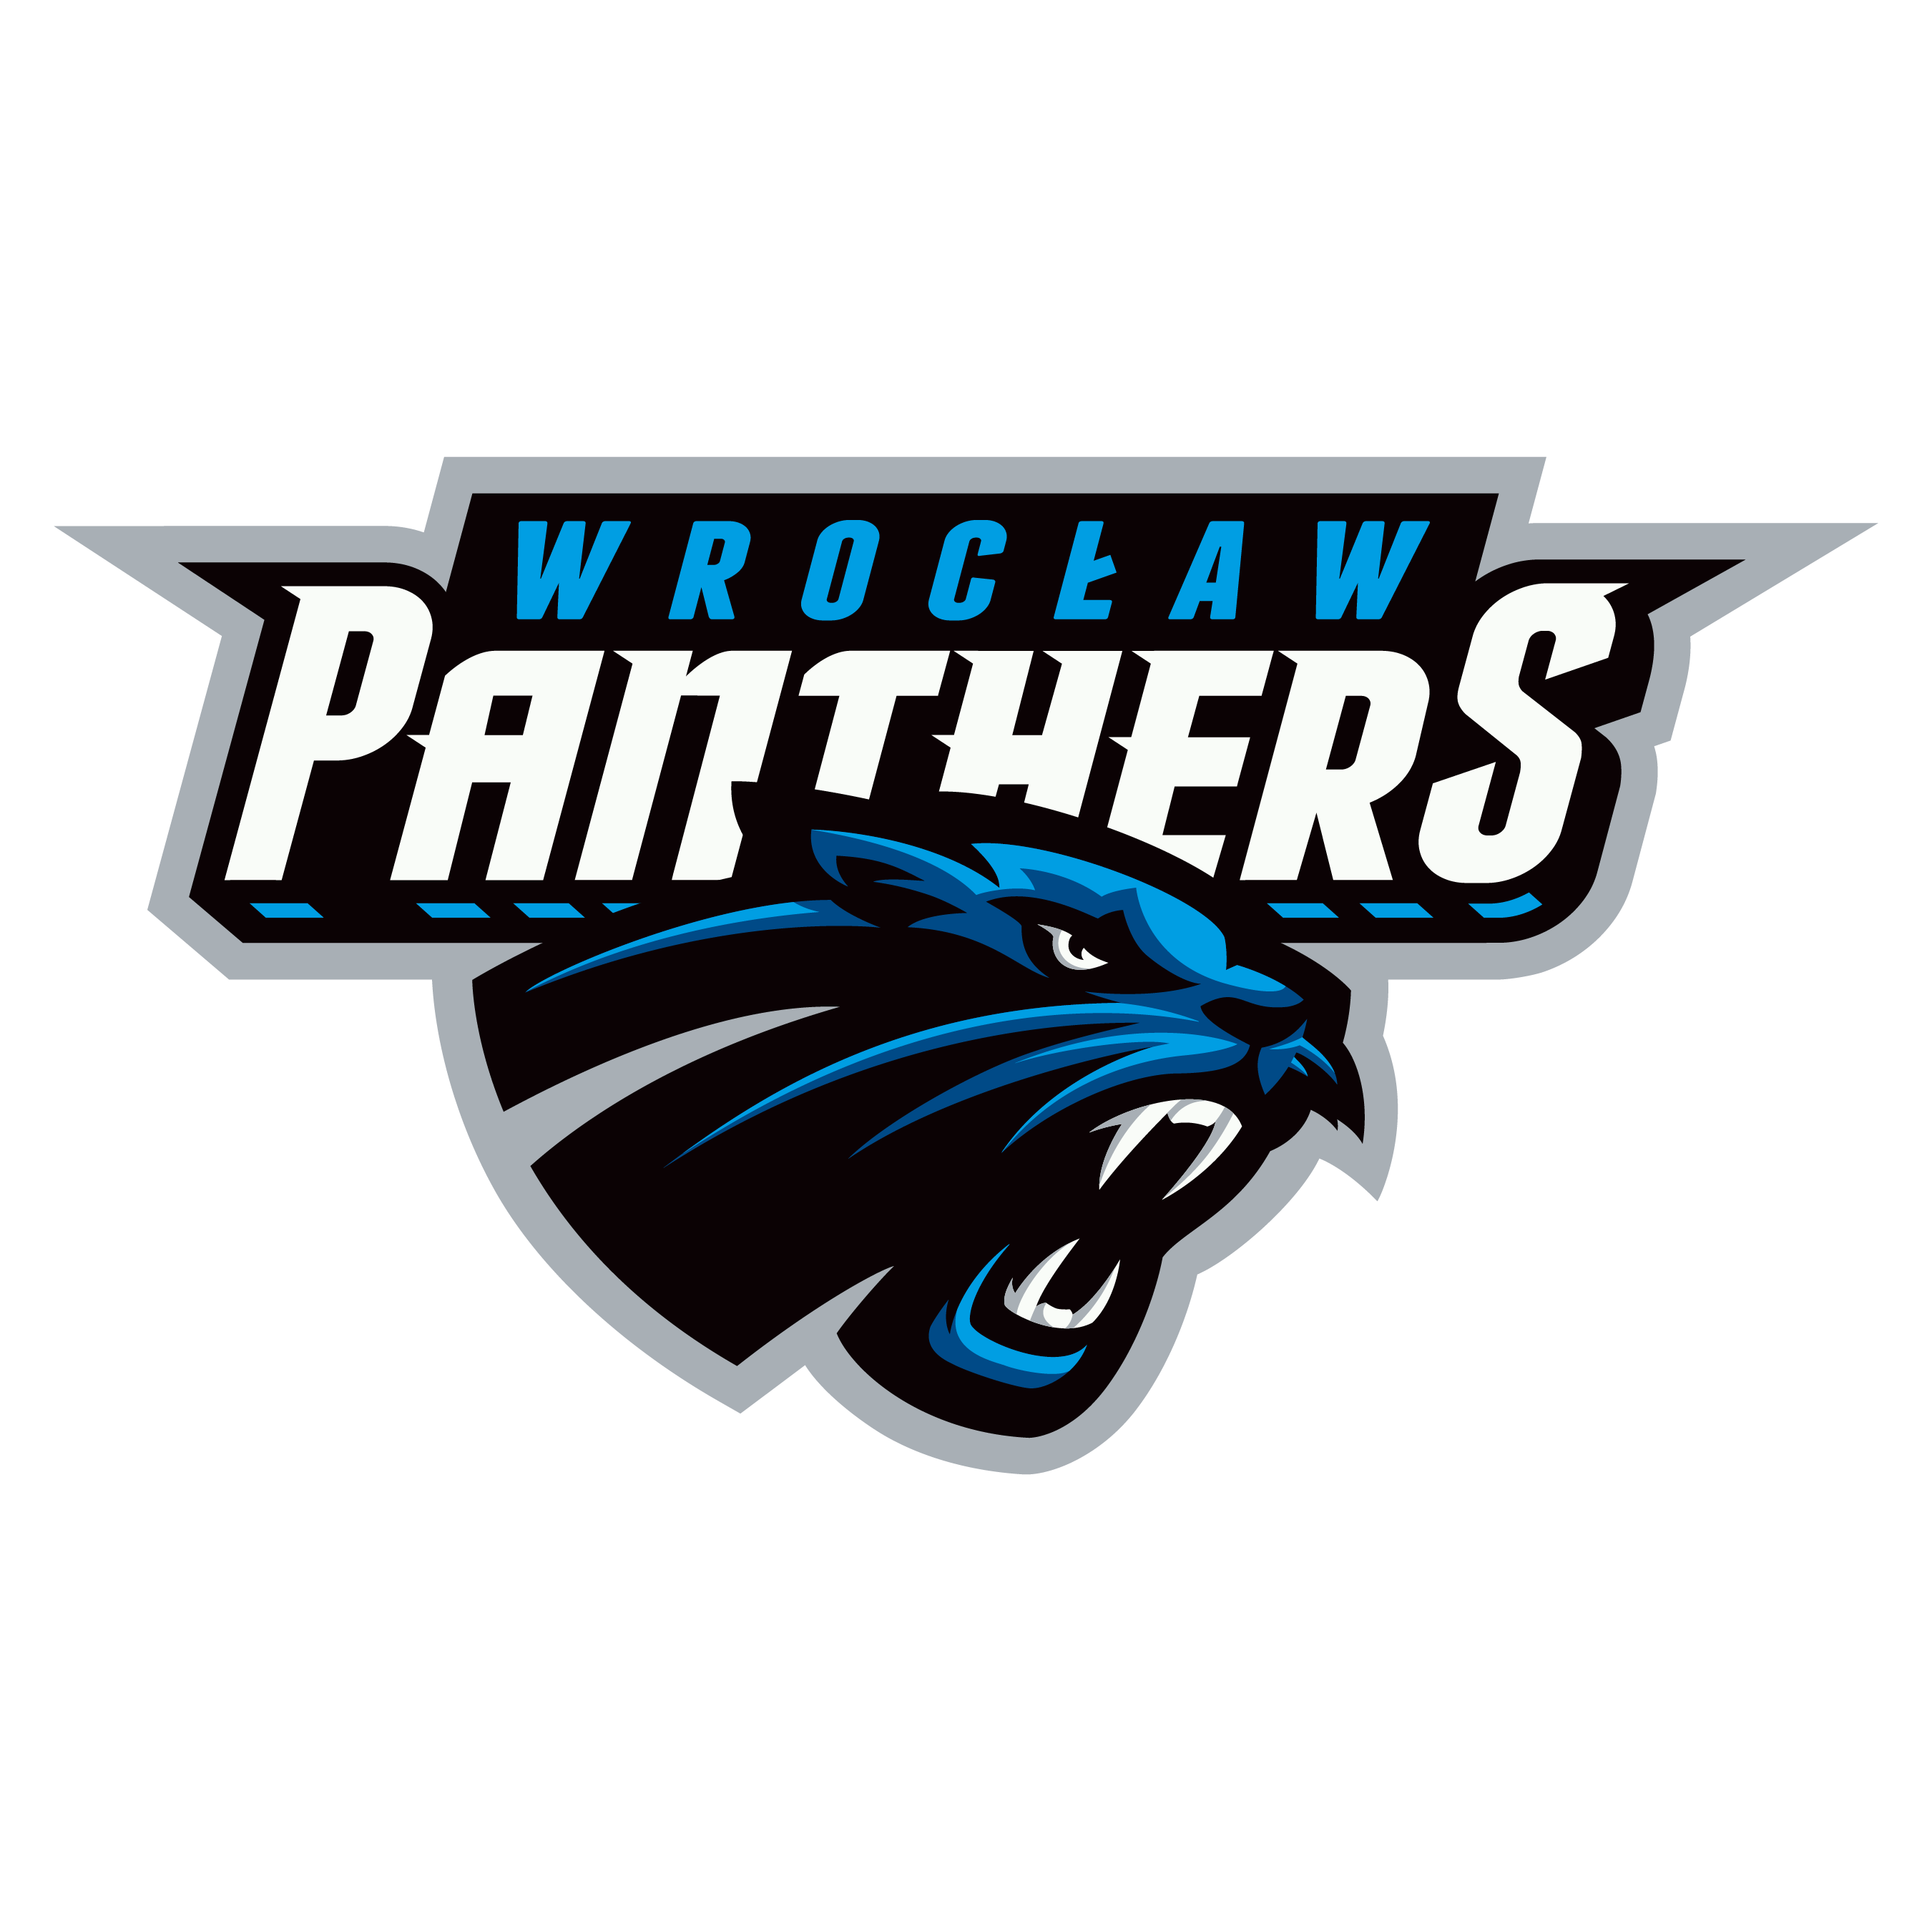 Panthers Wroclaw Logo